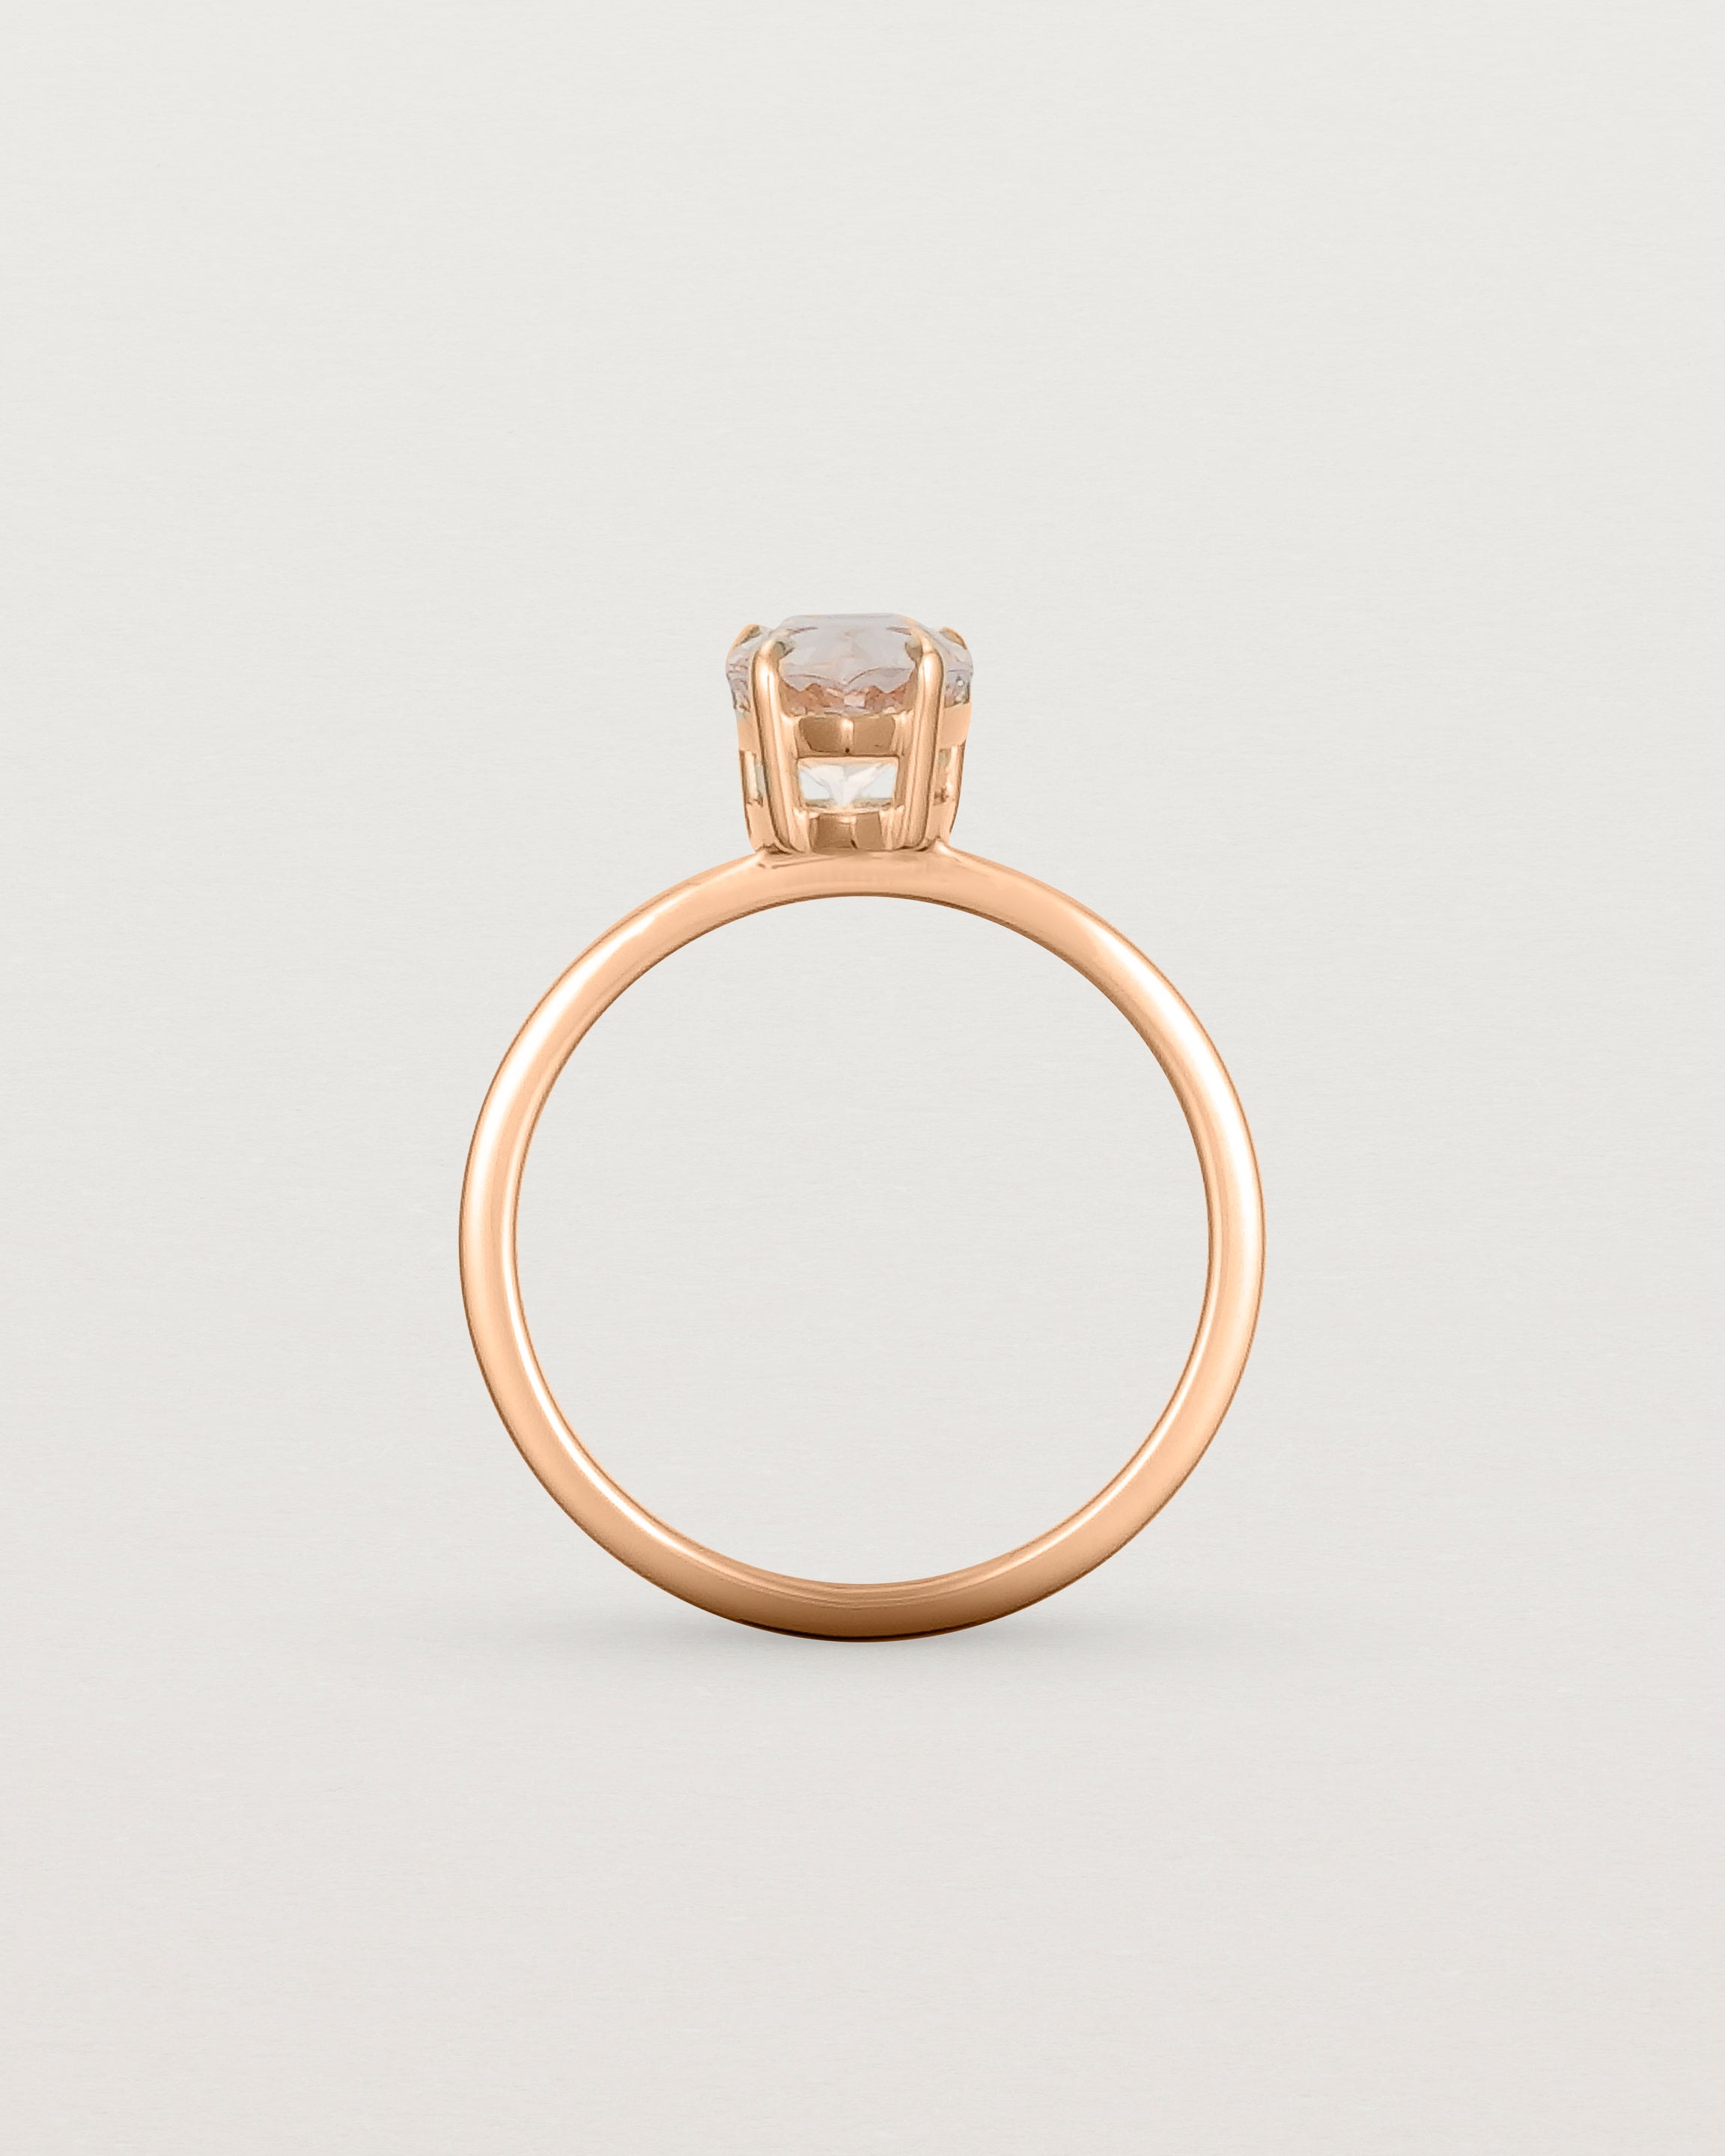 Standing view of the Una Pear Solitaire | Morganite | Rose Gold.